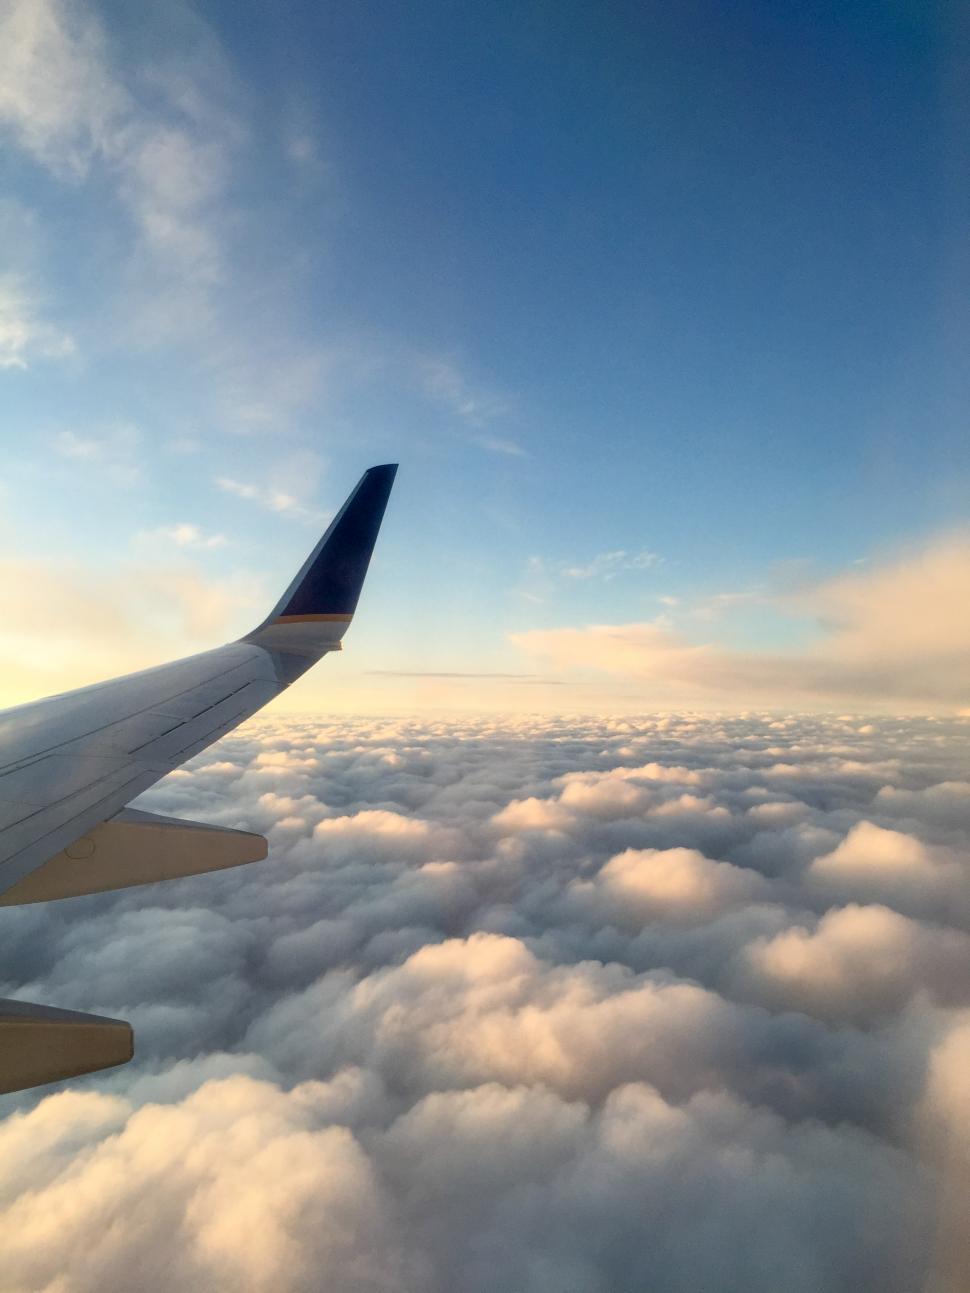 Download Free Stock Photo of Airplane wings and clouds 